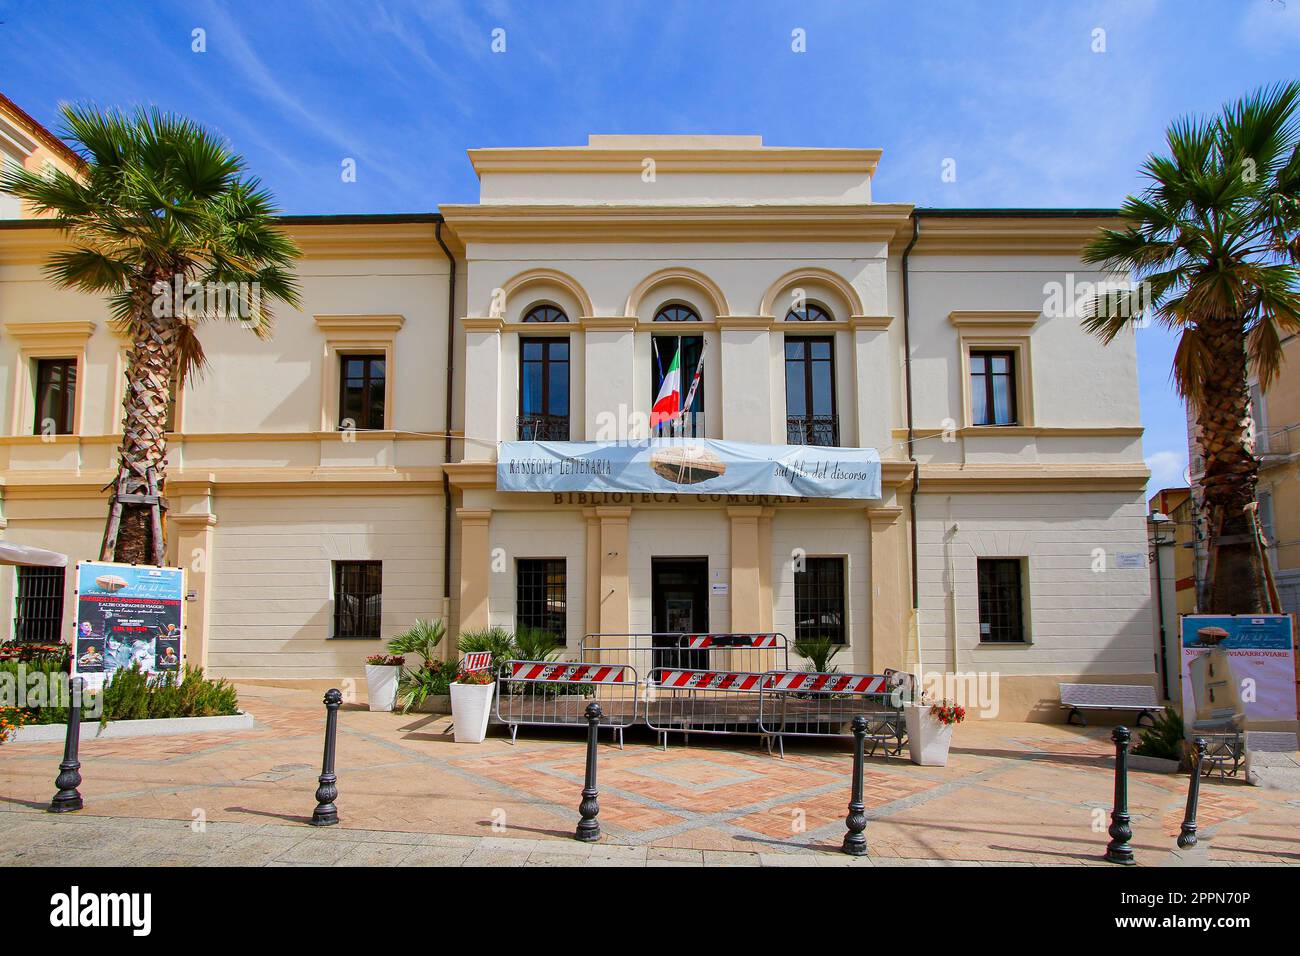 Olbia, Sardinia - August 8, 2019 : Facade of the Municipal Library of Olbia in Sardinia, Italy - Old building in the historical city center of this to Stock Photo